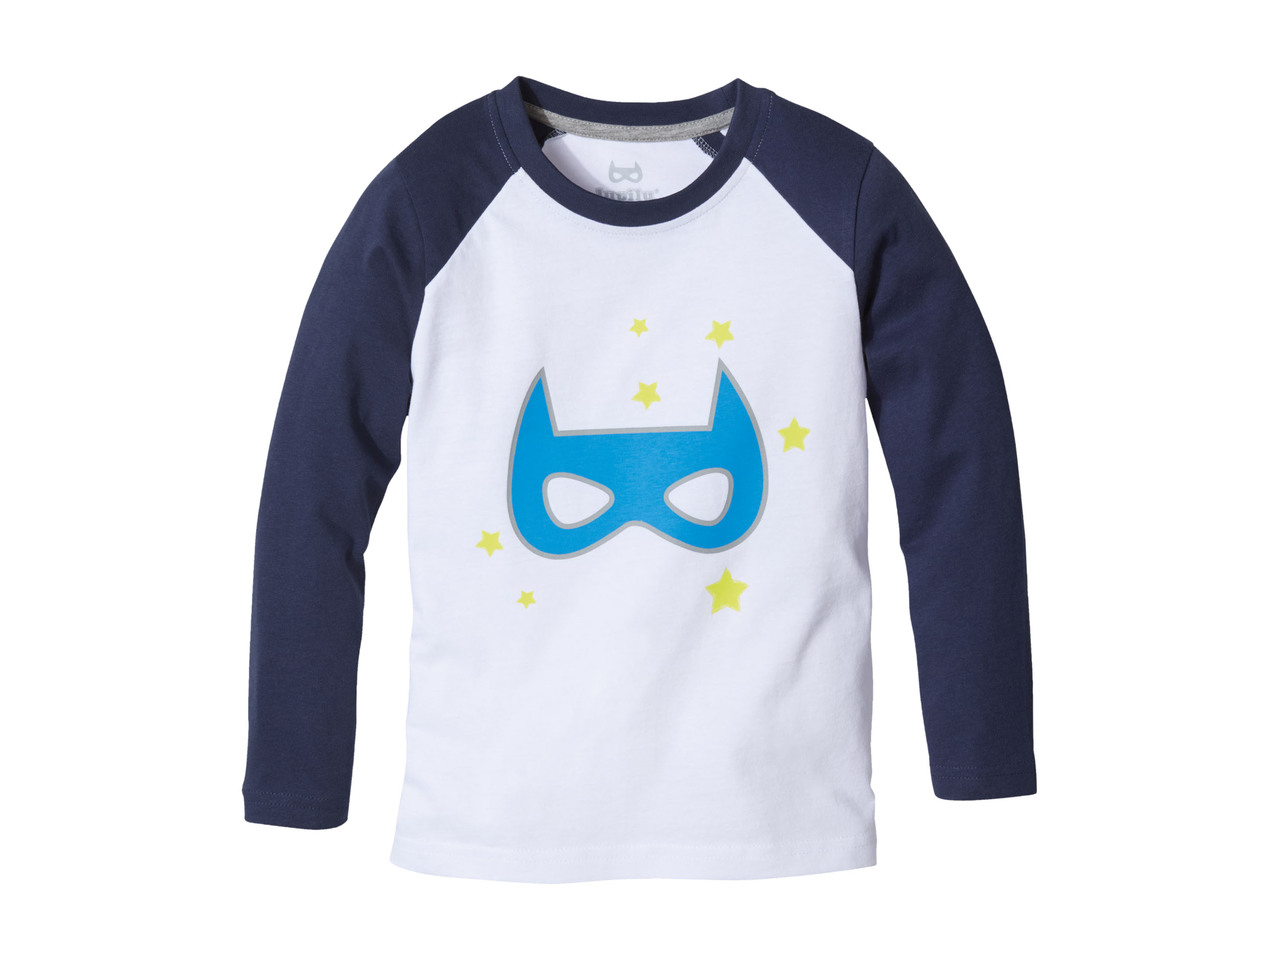 Boys' "Glow in the Dark" Long-Sleeved Tops, 2 pieces